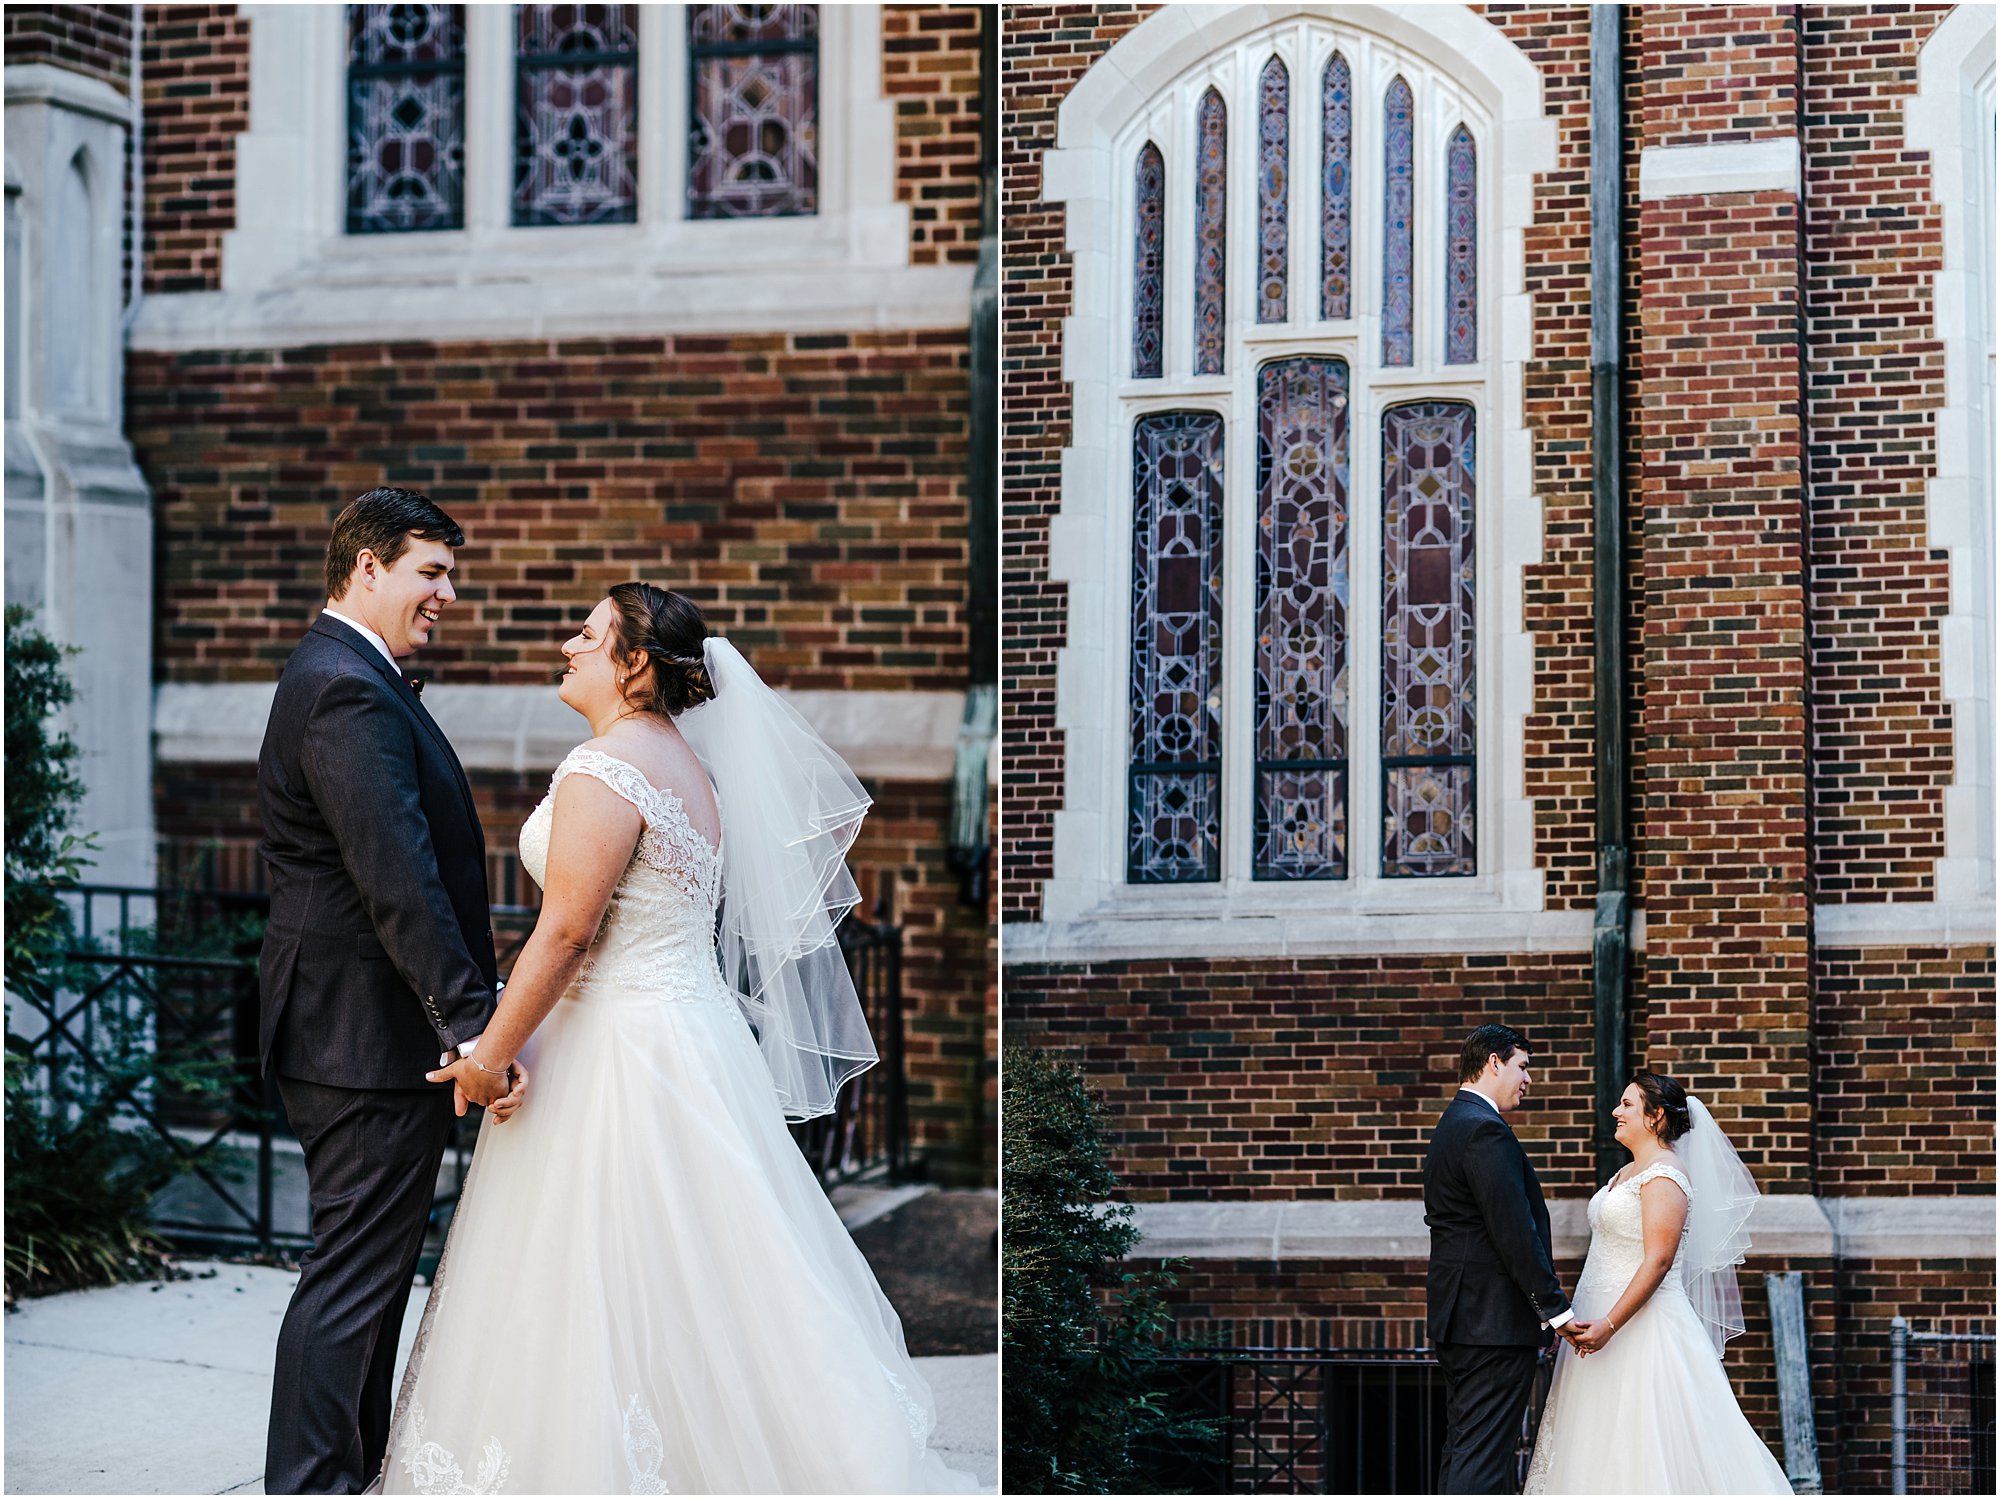 Bride and groom embracing during their first look in Memphis, TN